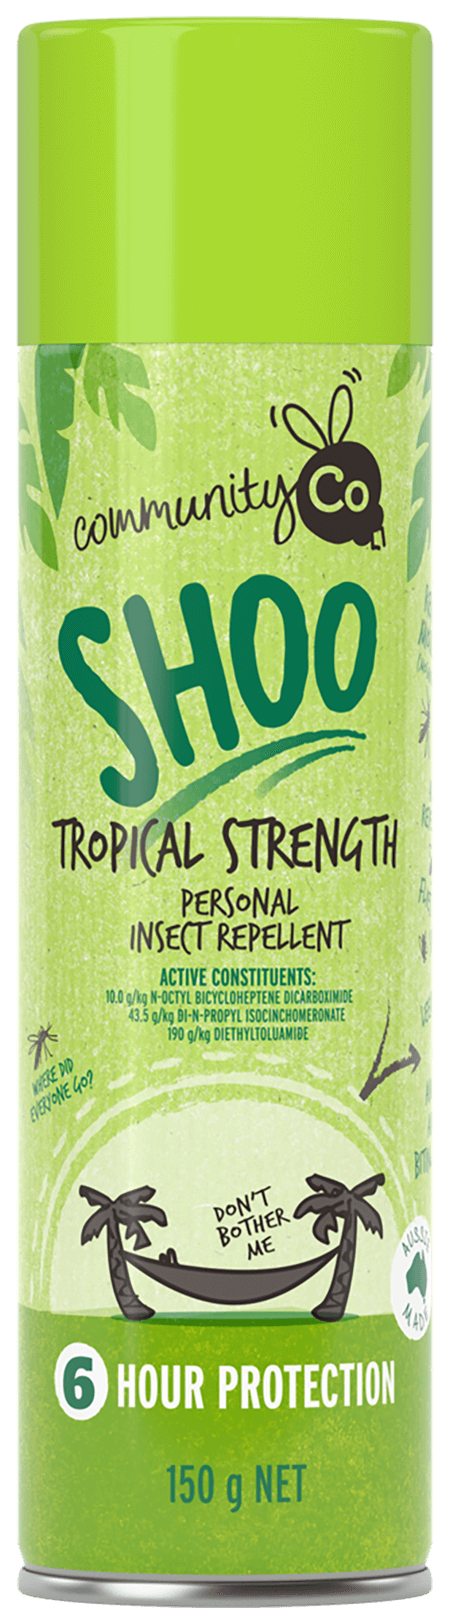 Personal Insect Repellent 150g